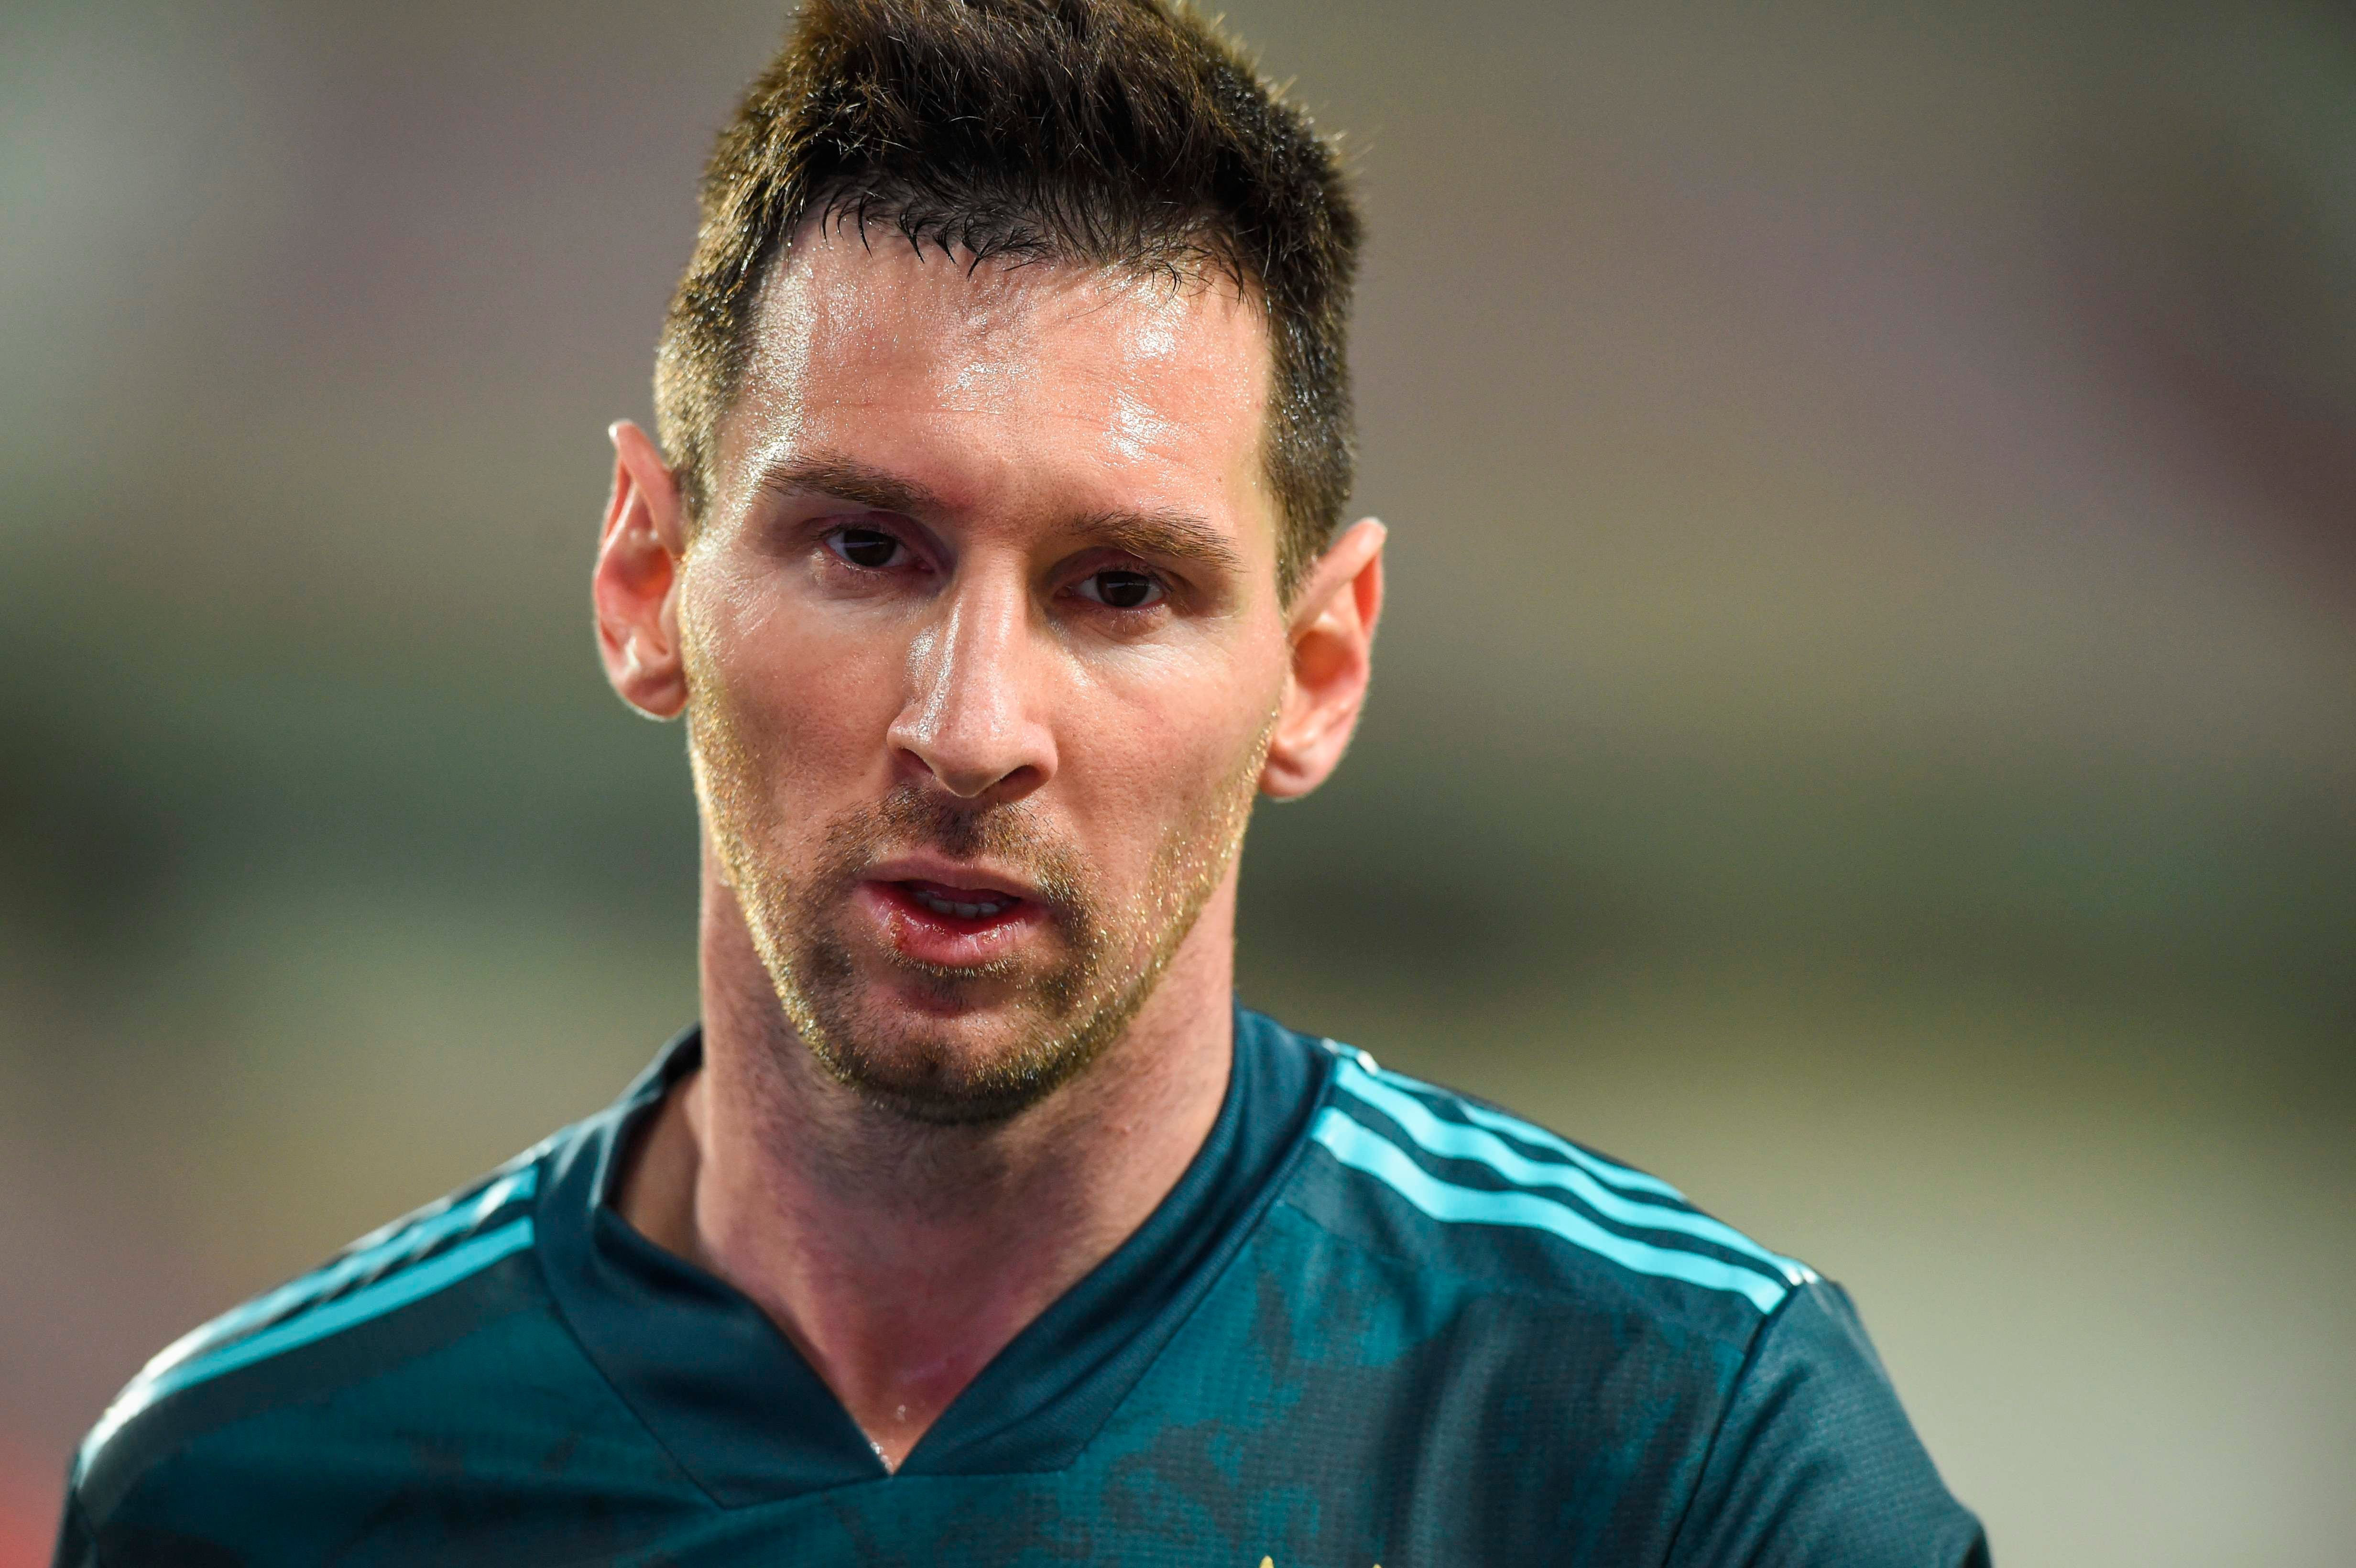 Lionel Messi returned from international duty to address the criticism